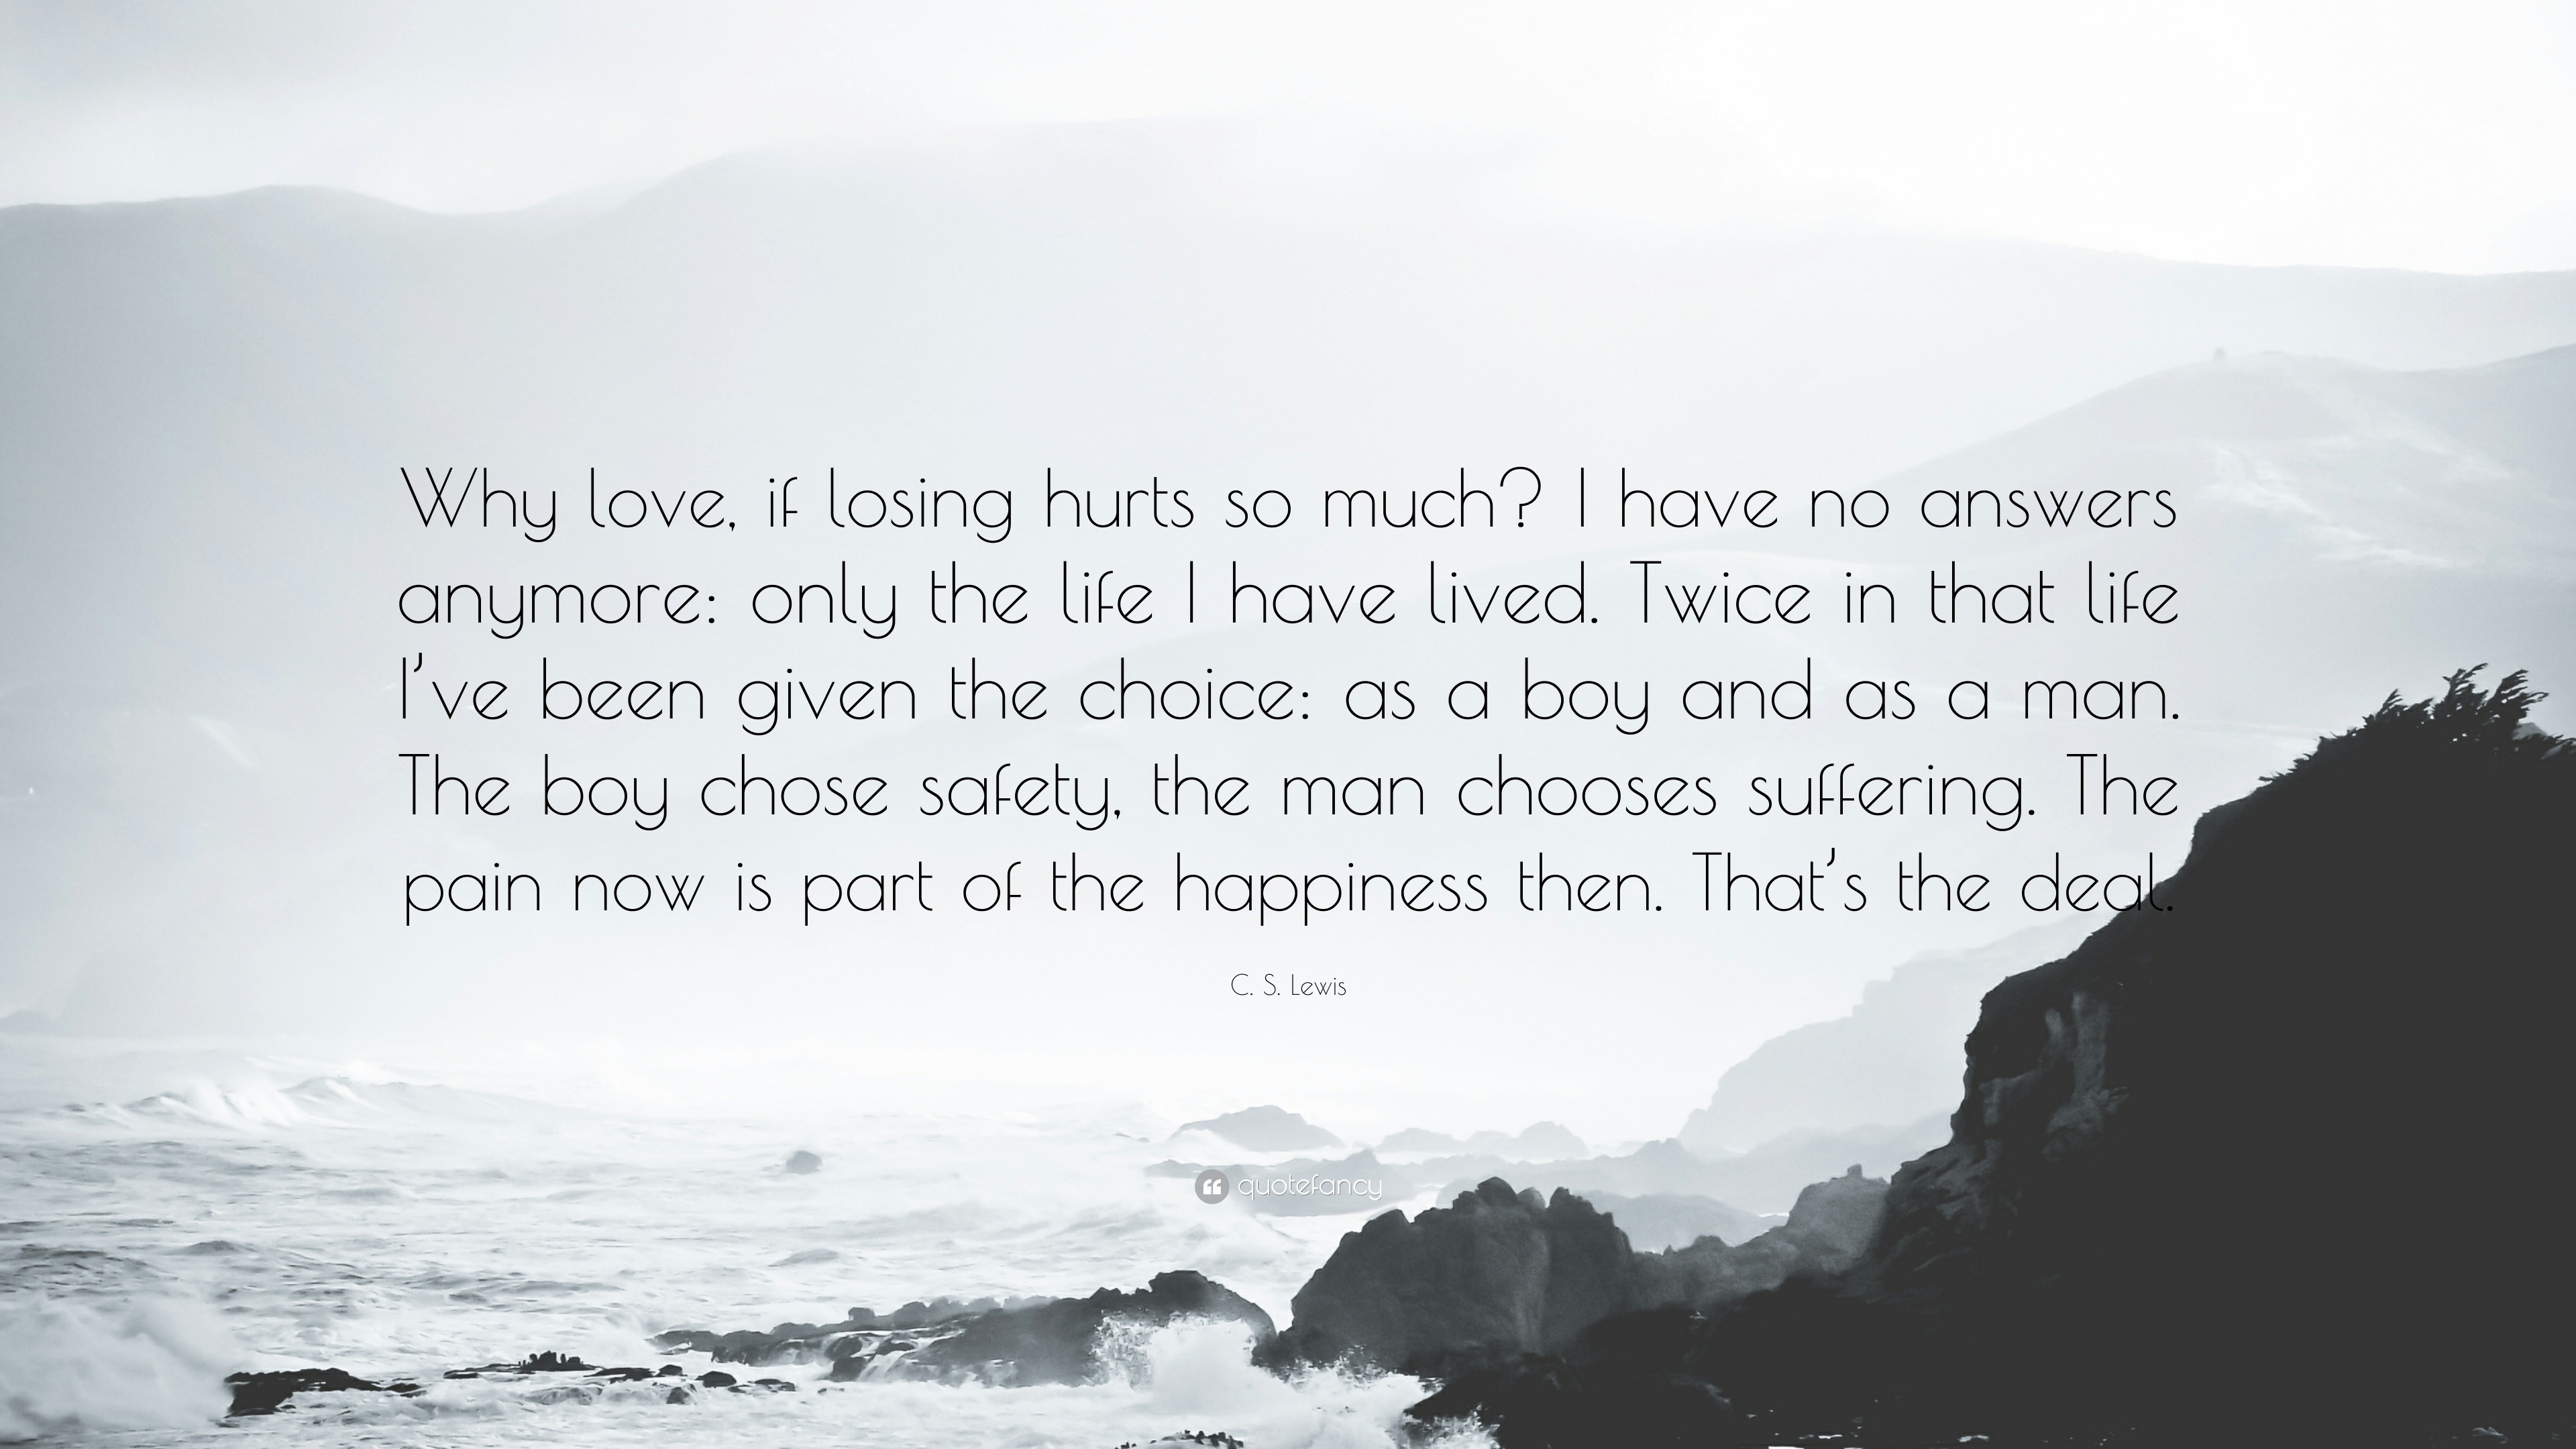 C S Lewis Quote “Why love if losing hurts so much I have